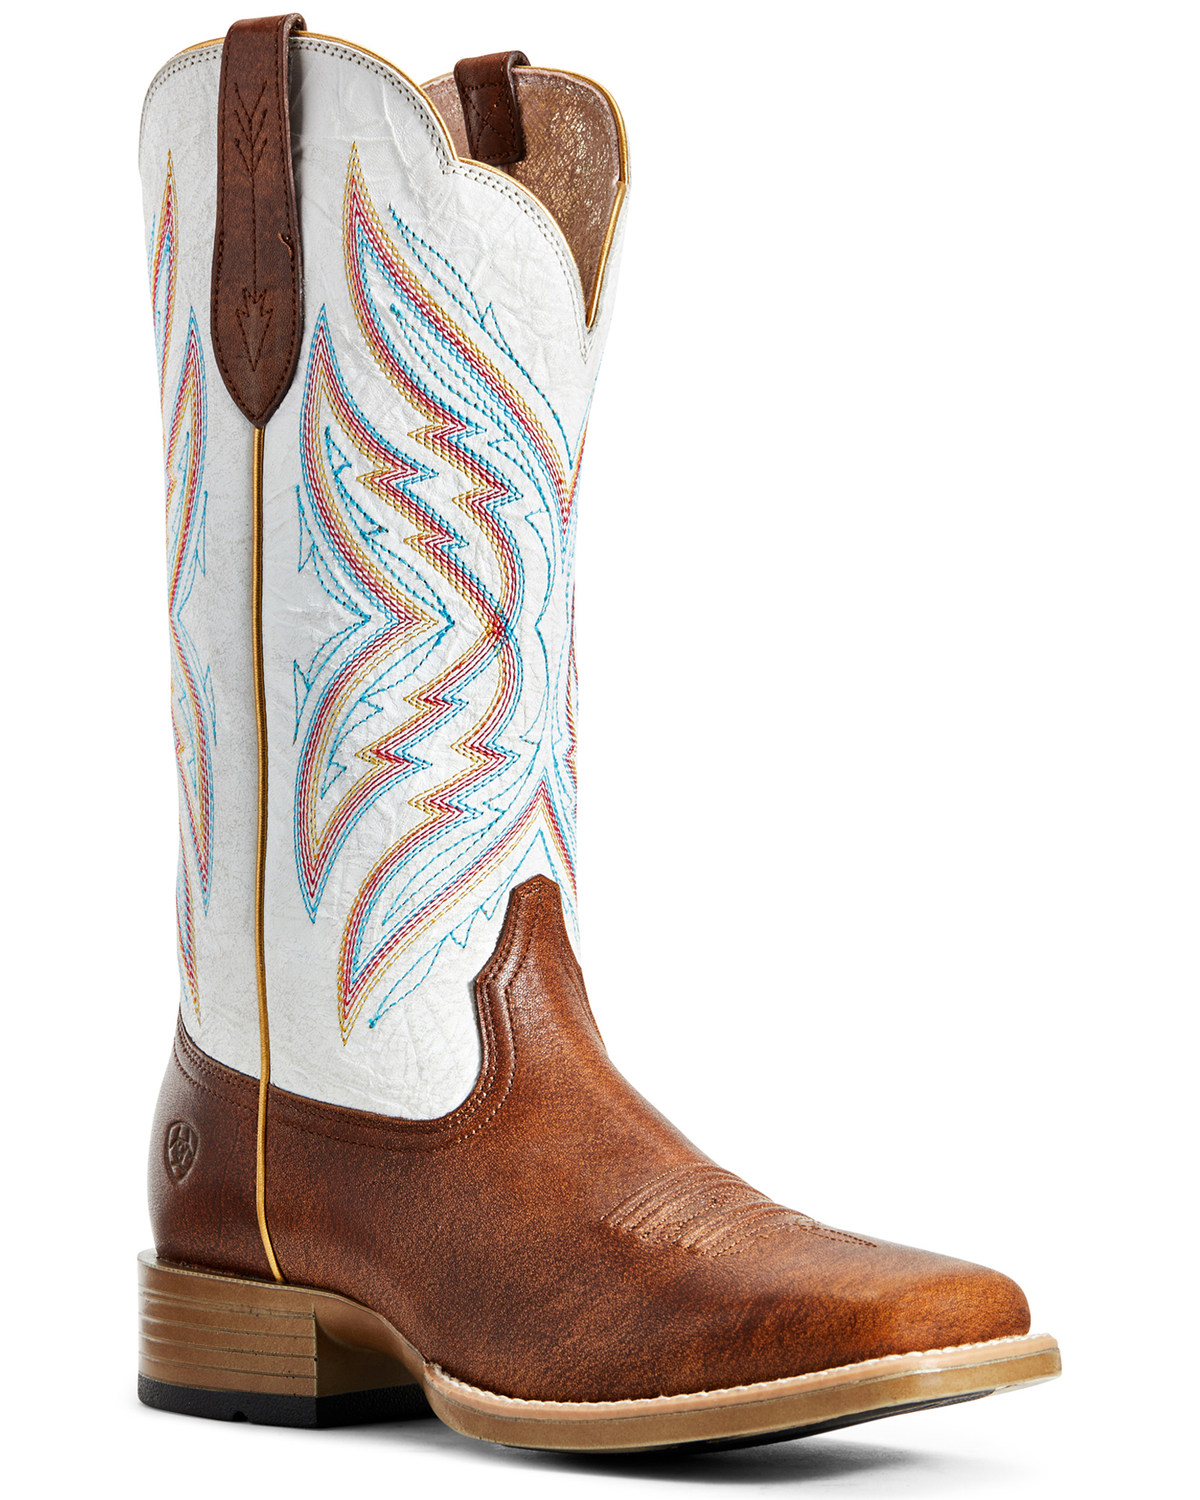 womens wide western boots